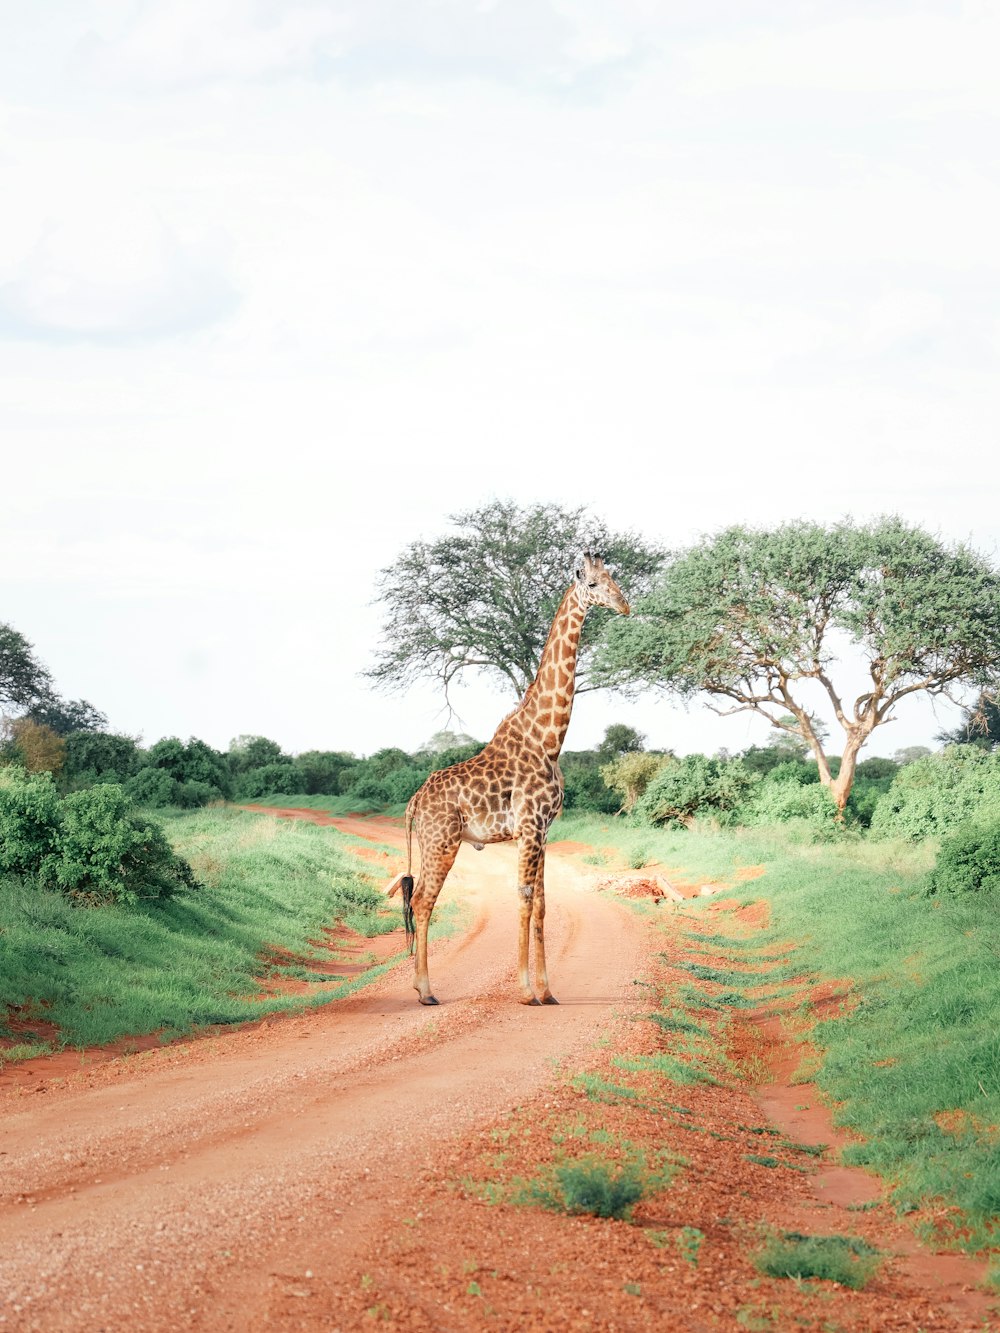 a giraffe standing in the middle of a dirt road